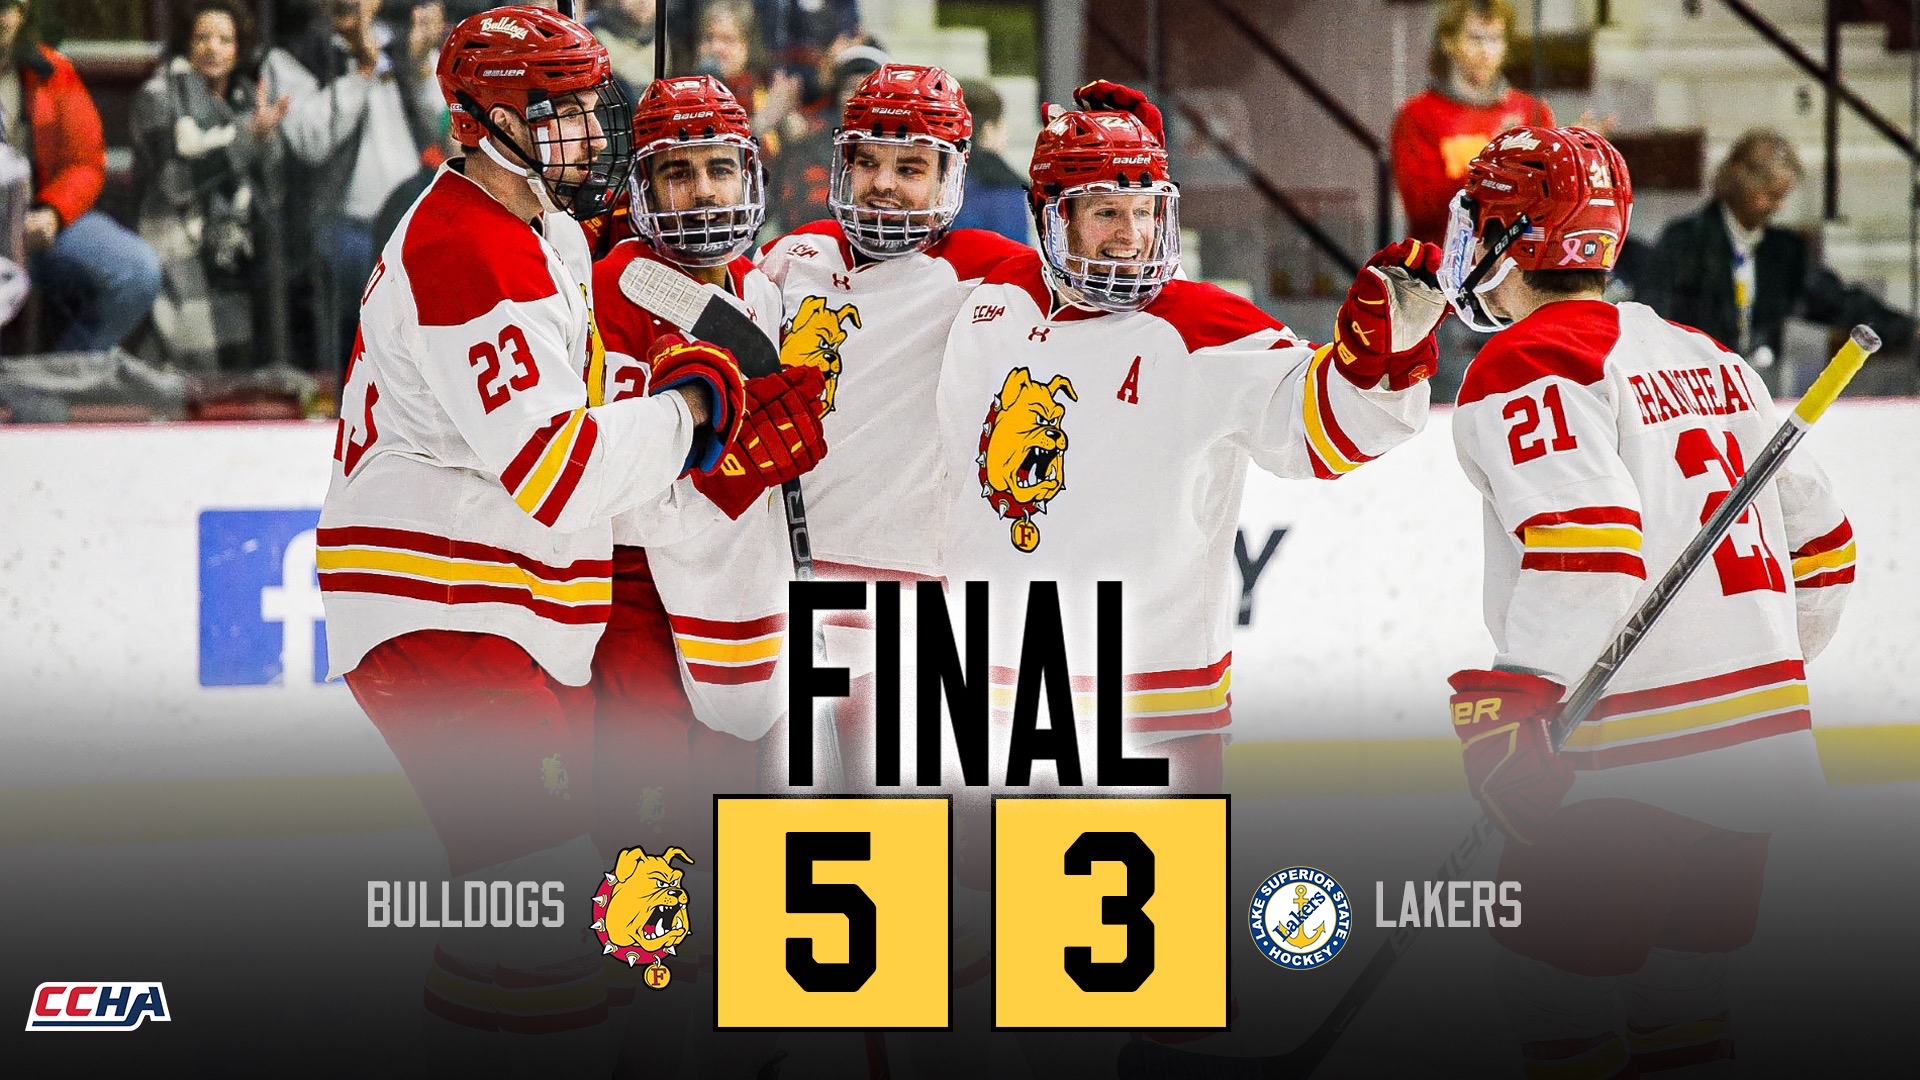 Bulldog Hockey Wins Fifth CCHA Game With 5-3 Victory Over Lake State at Home